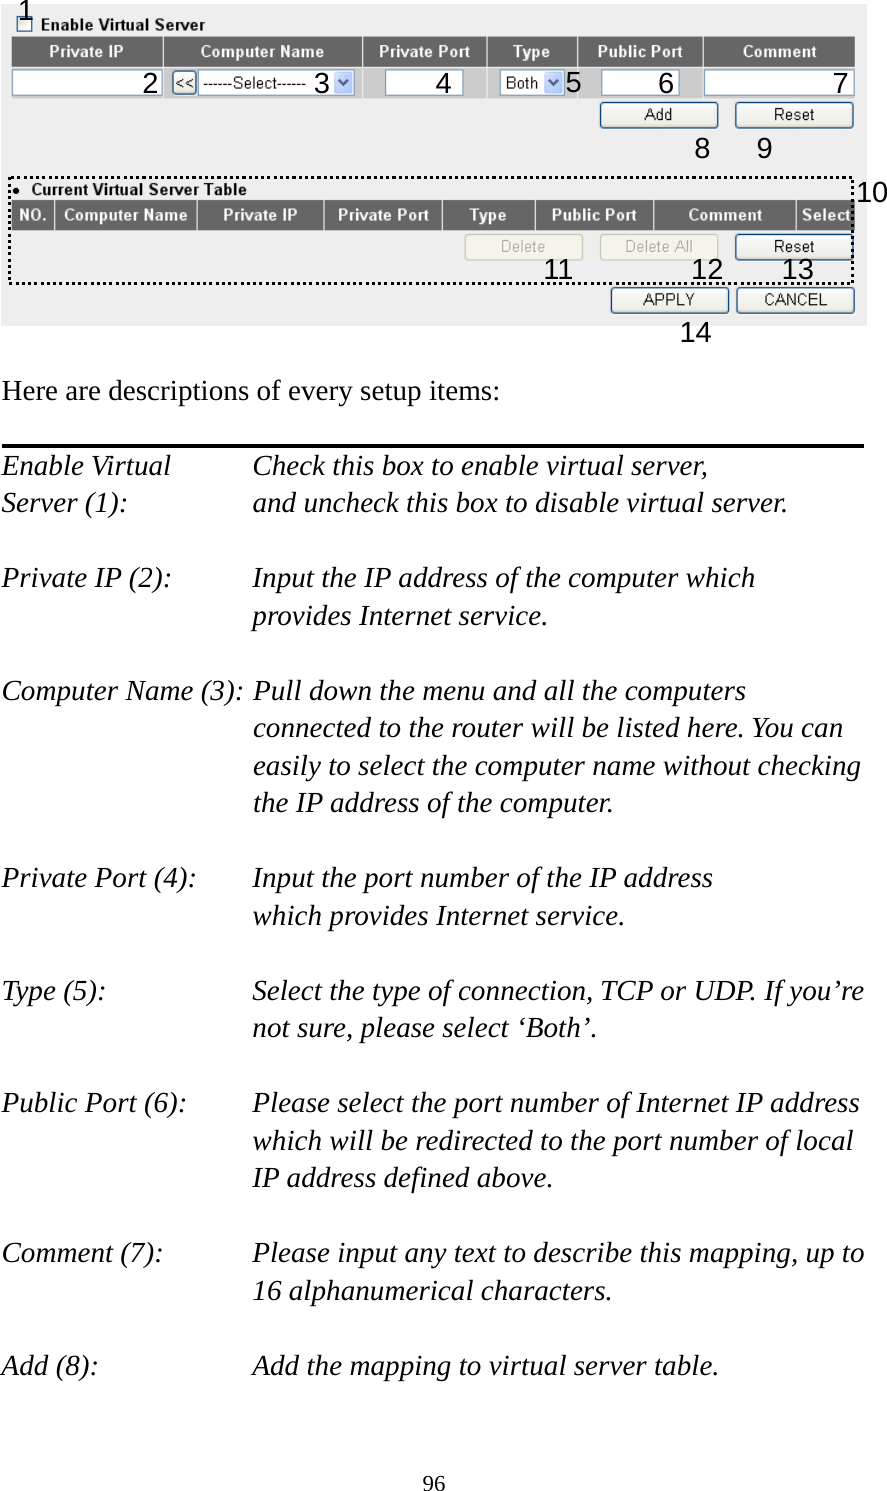 96   Here are descriptions of every setup items:  Enable Virtual      Check this box to enable virtual server, Server (1):       and uncheck this box to disable virtual server.  Private IP (2):      Input the IP address of the computer which      provides Internet service.  Computer Name (3): Pull down the menu and all the computers connected to the router will be listed here. You can easily to select the computer name without checking the IP address of the computer.  Private Port (4):    Input the port number of the IP address      which provides Internet service.  Type (5):    Select the type of connection, TCP or UDP. If you’re not sure, please select ‘Both’.  Public Port (6):    Please select the port number of Internet IP address which will be redirected to the port number of local IP address defined above.  Comment (7):    Please input any text to describe this mapping, up to 16 alphanumerical characters.  Add (8):        Add the mapping to virtual server table.  1 2 3 4 5 8 9 10 11 12 13 14 7 6 